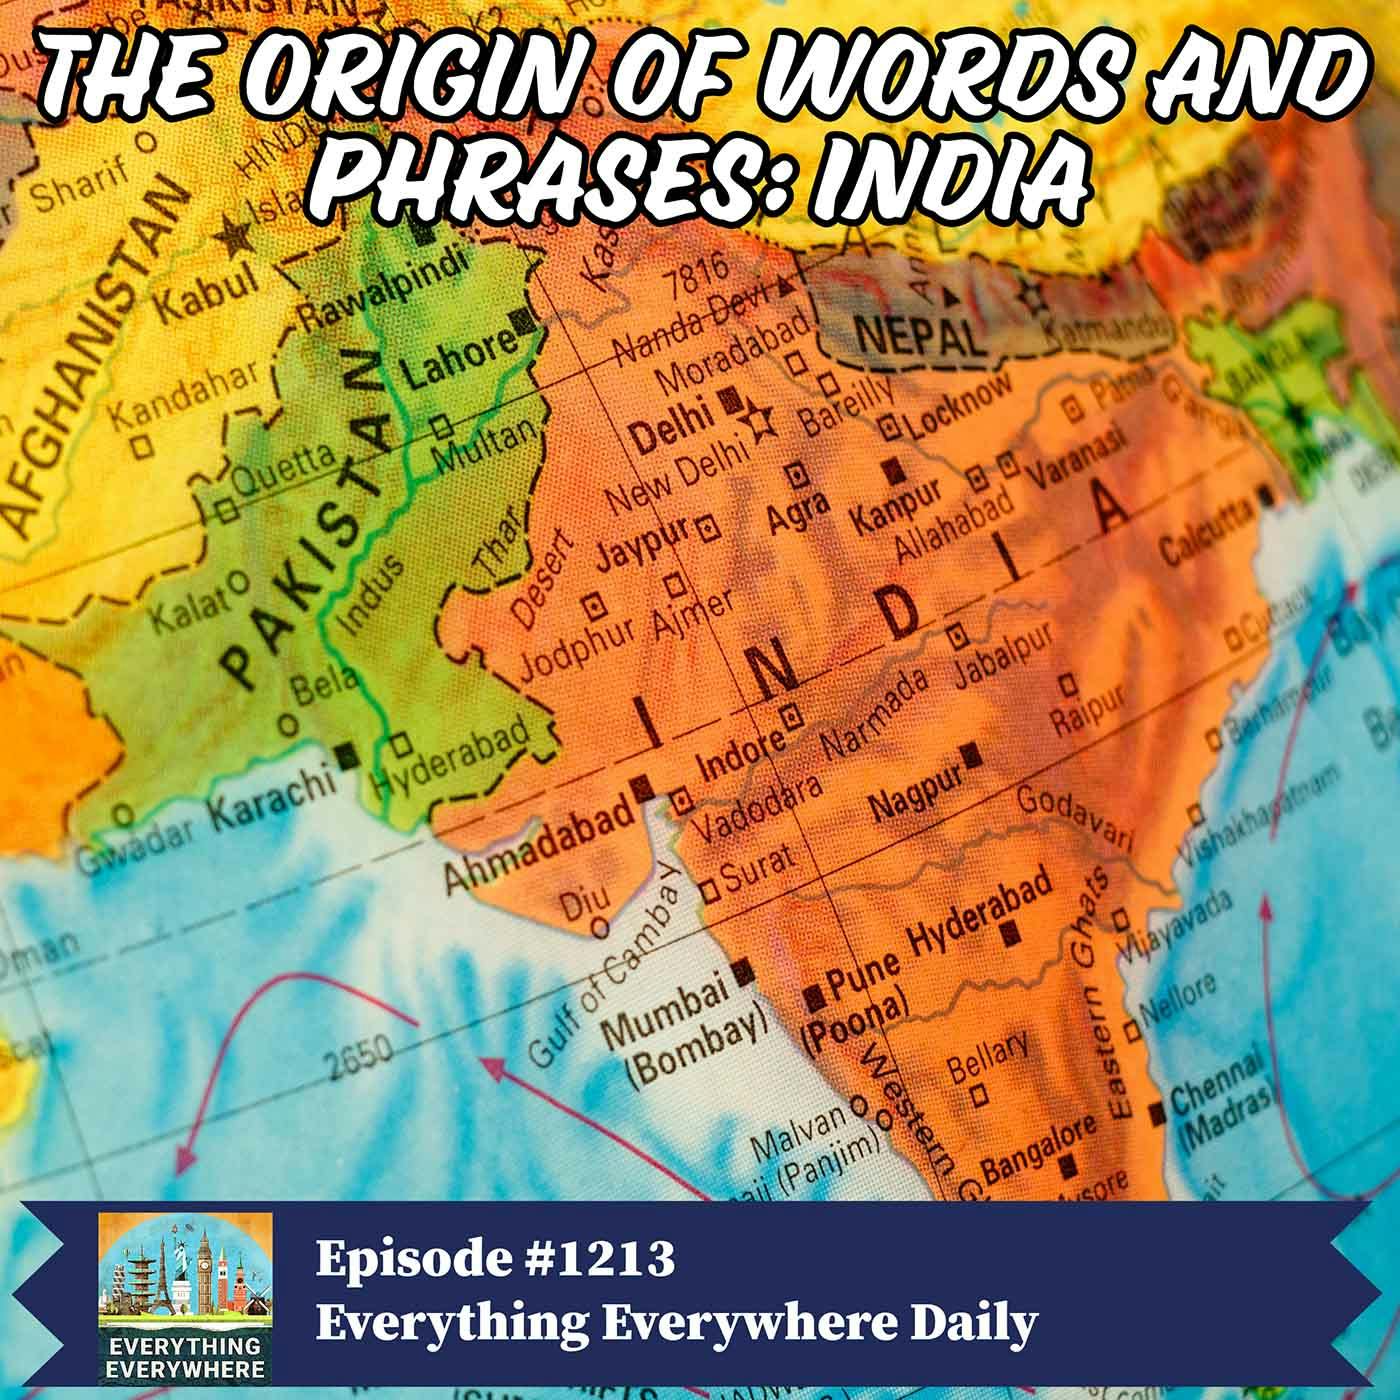 The Origin of Words and Phrases: India